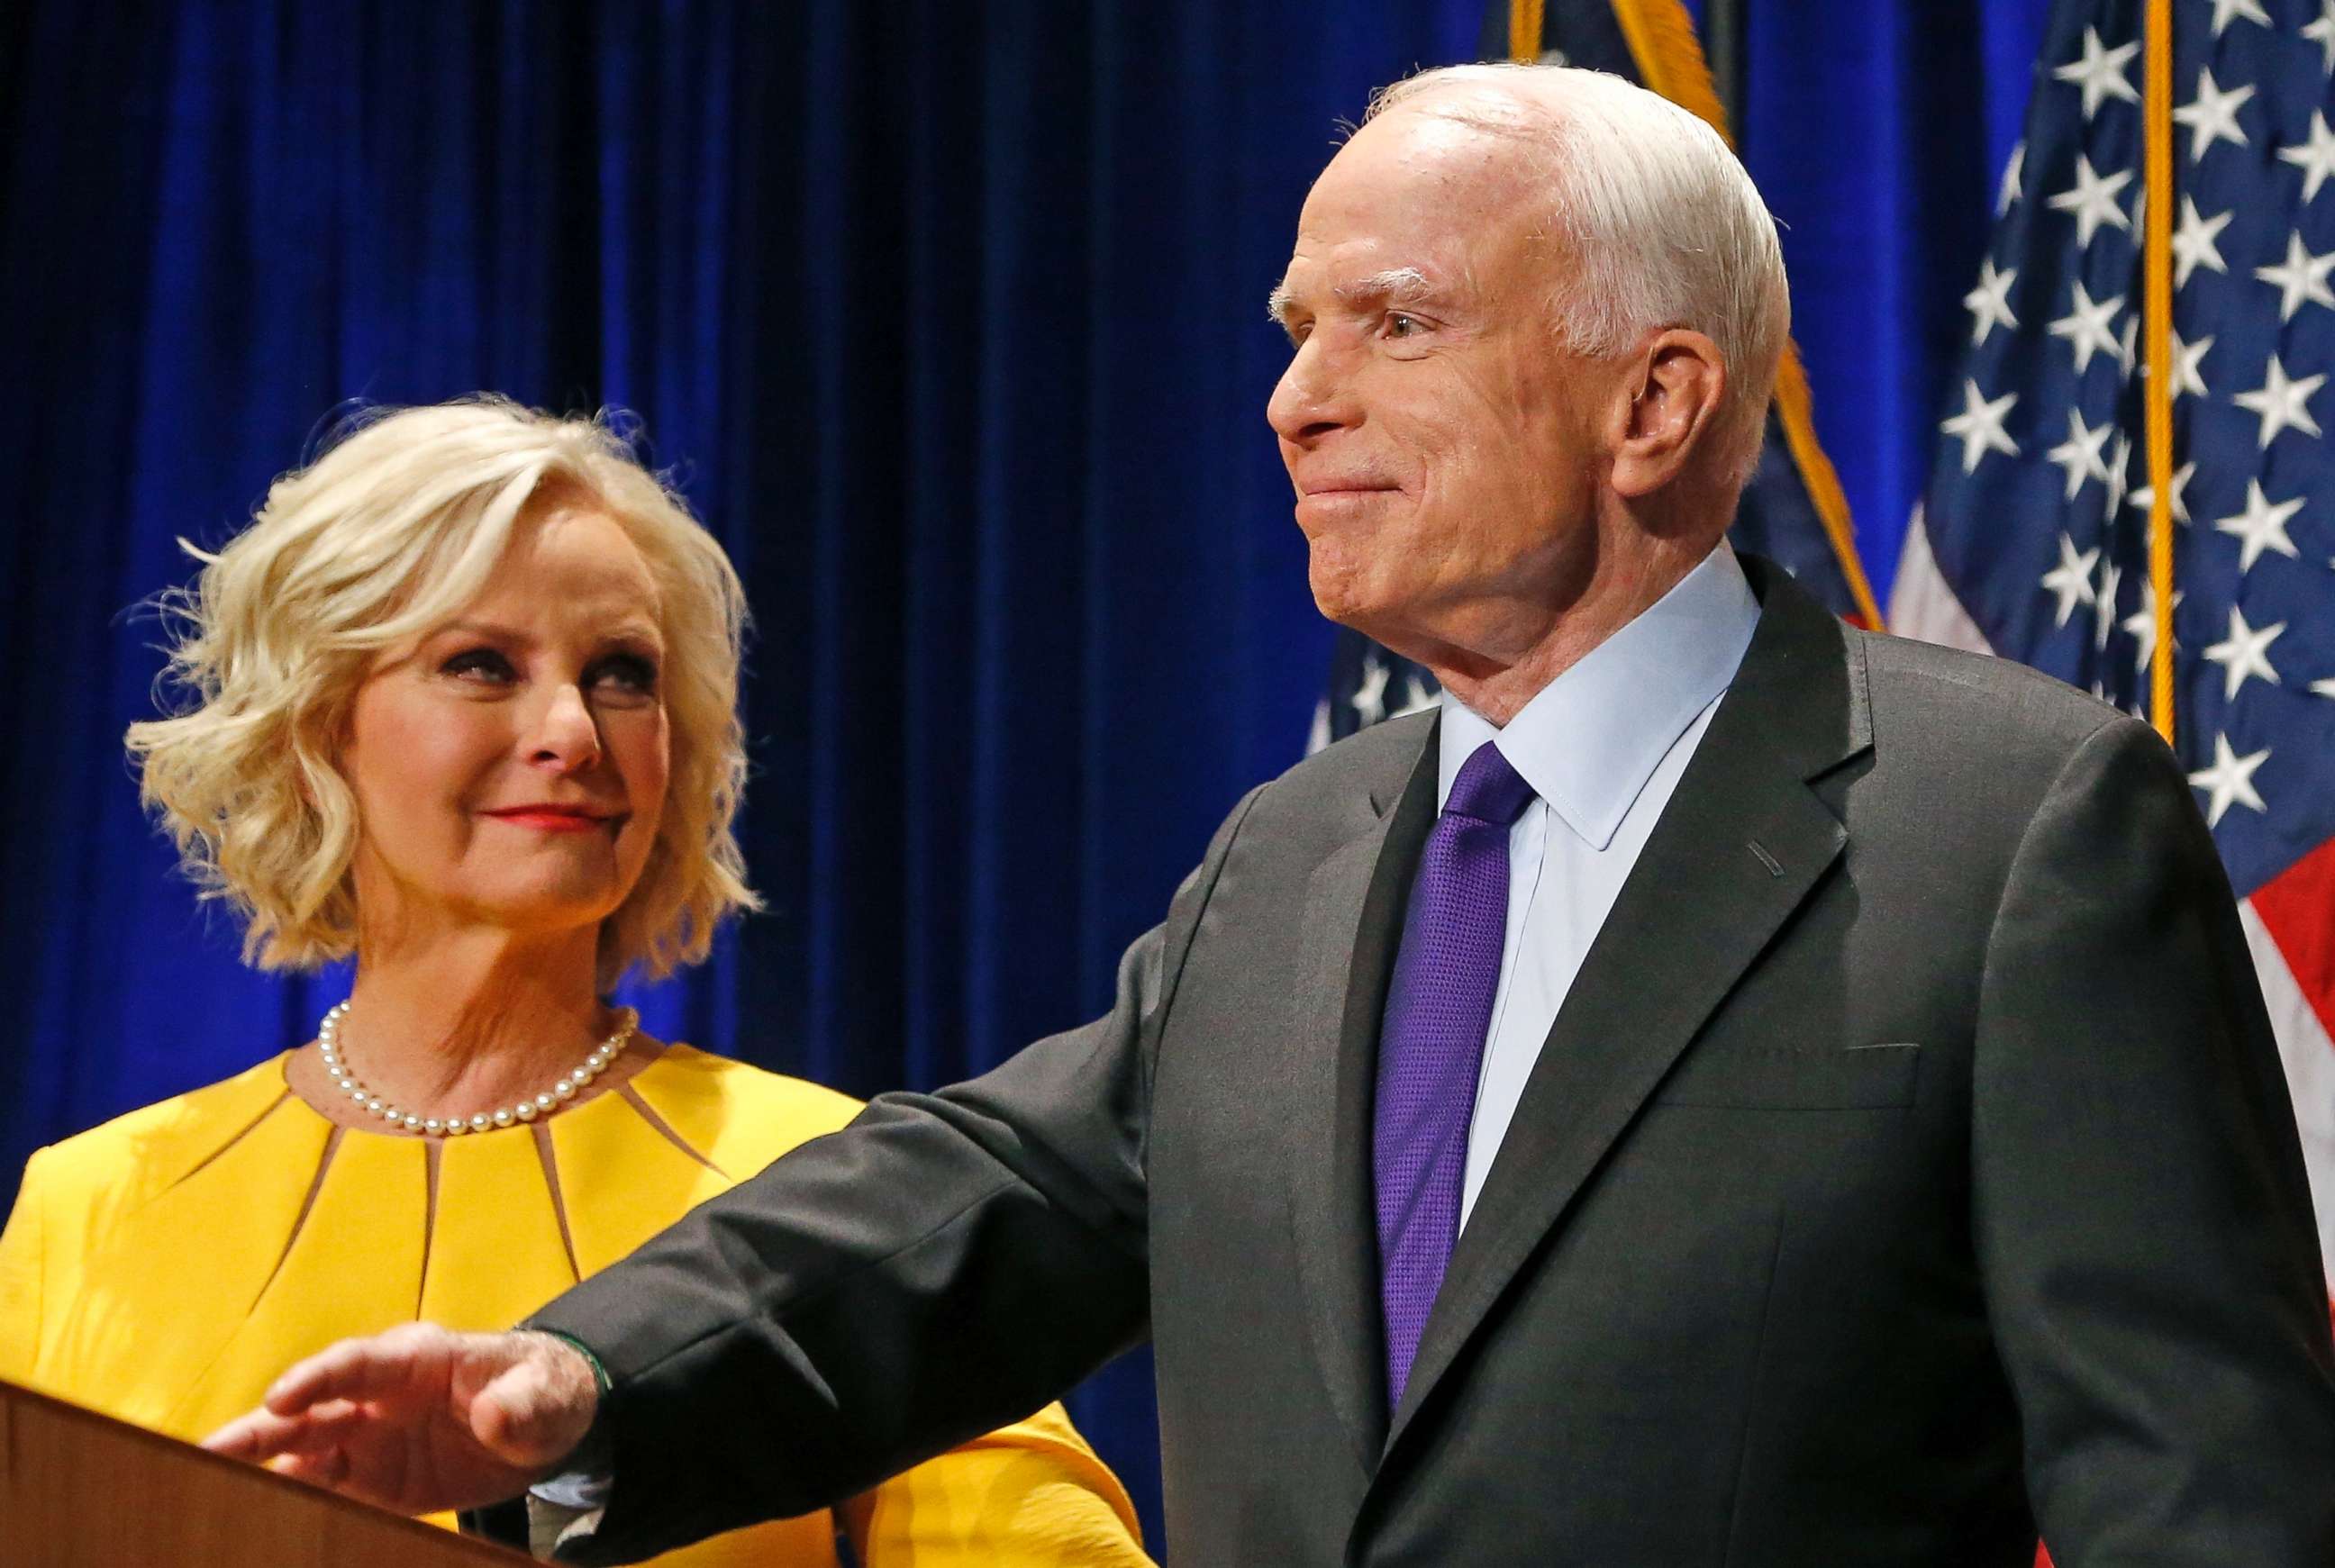 PHOTO: FILE - In this Nov. 8, 2016 file photo, Sen. John McCain, R-Ariz., accompanied by his wife Cindy McCain, pauses after speaking in Phoenix.